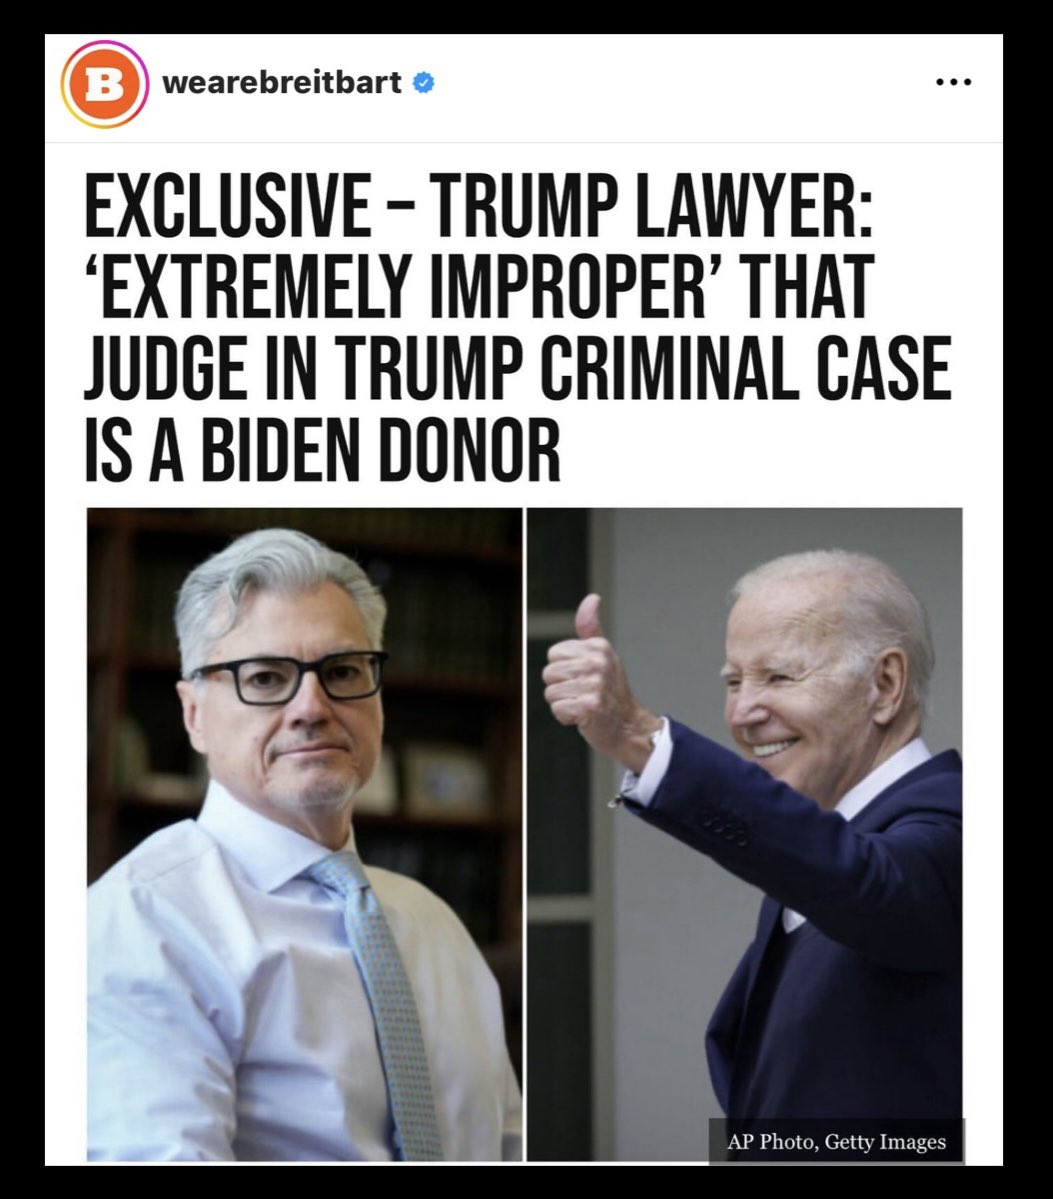 America’s legal and justice system has severely fallen apart under the communist Biden administration. Repost if you agree.